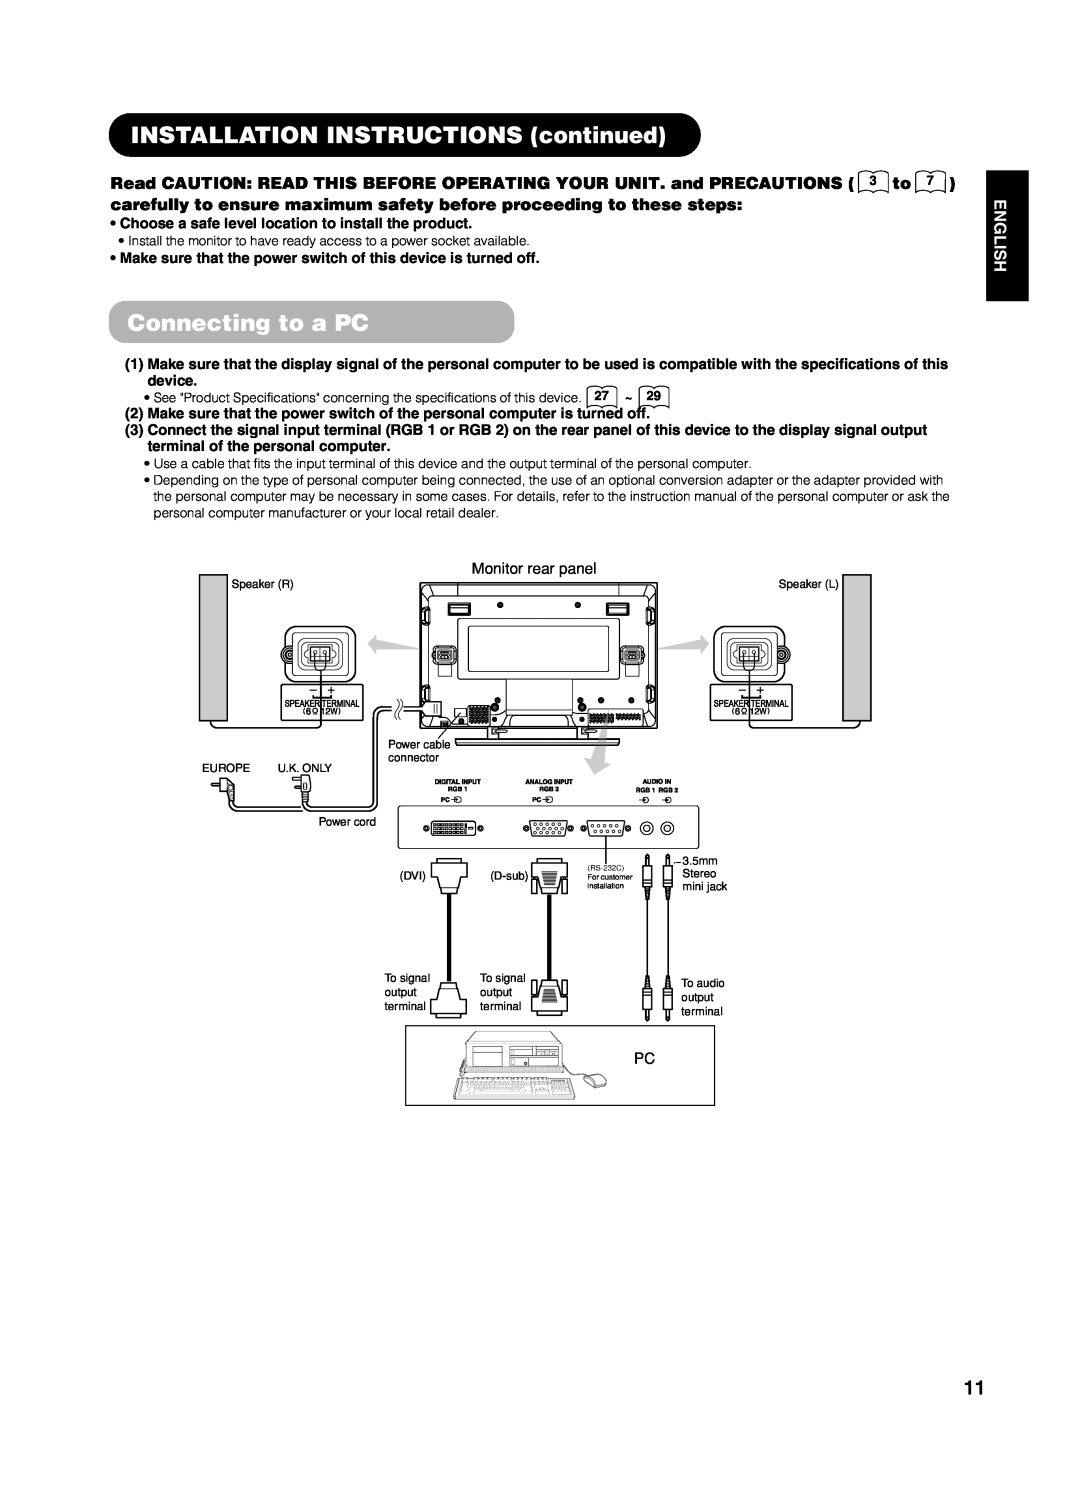 Yamaha PDM-4210E user manual INSTALLATION INSTRUCTIONS continued, Connecting to a PC, English 